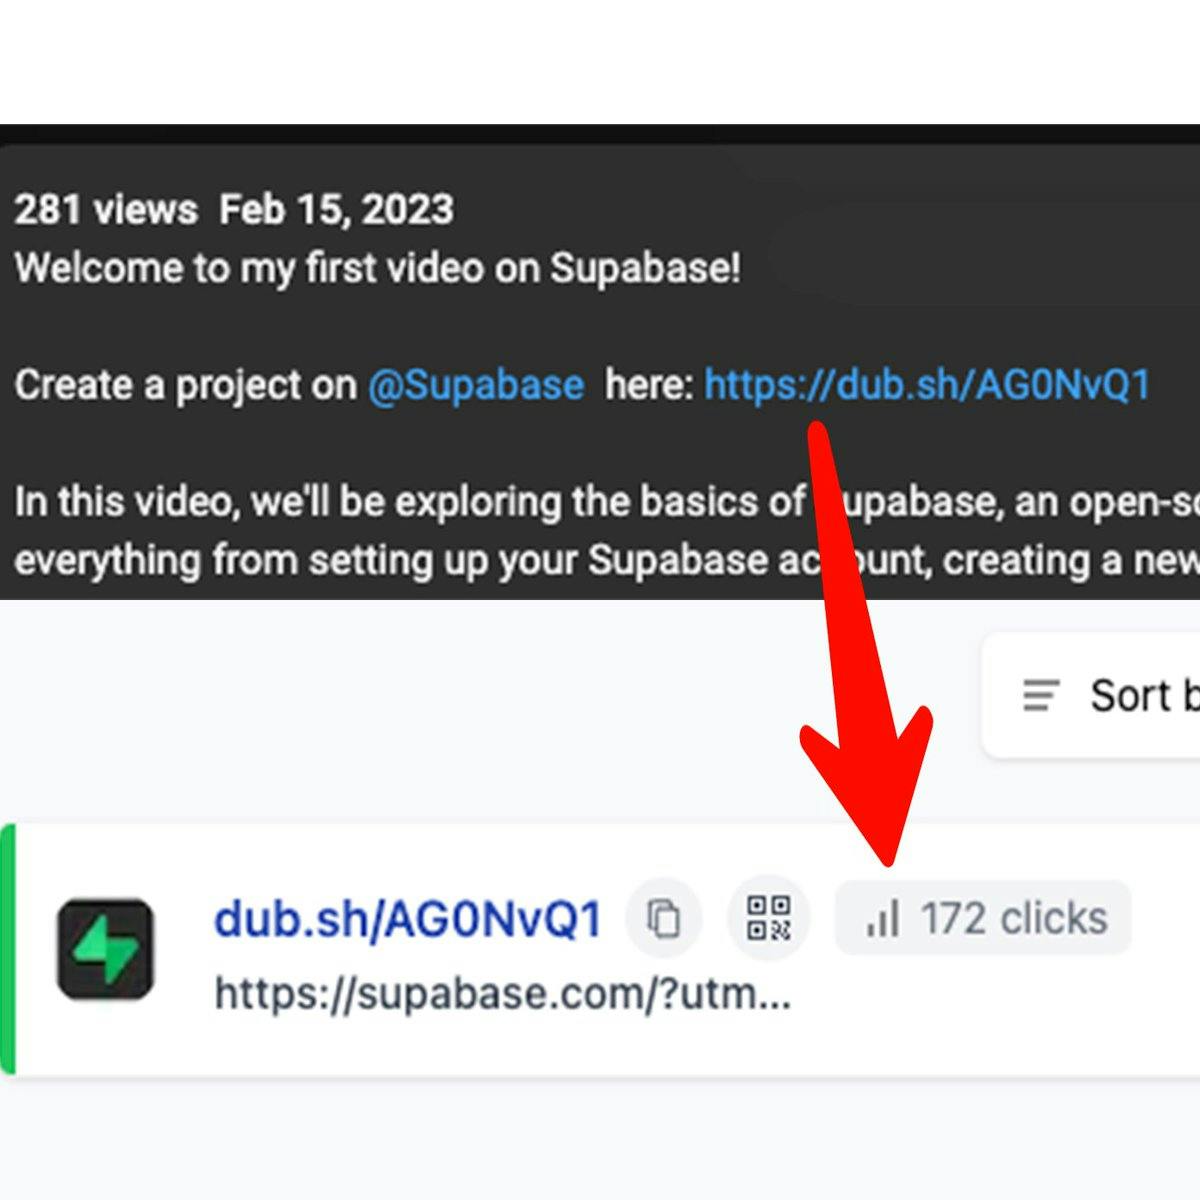 Thanks to @steventey for @dubdotsh ! My link to create a @supabase project is working 🥰 